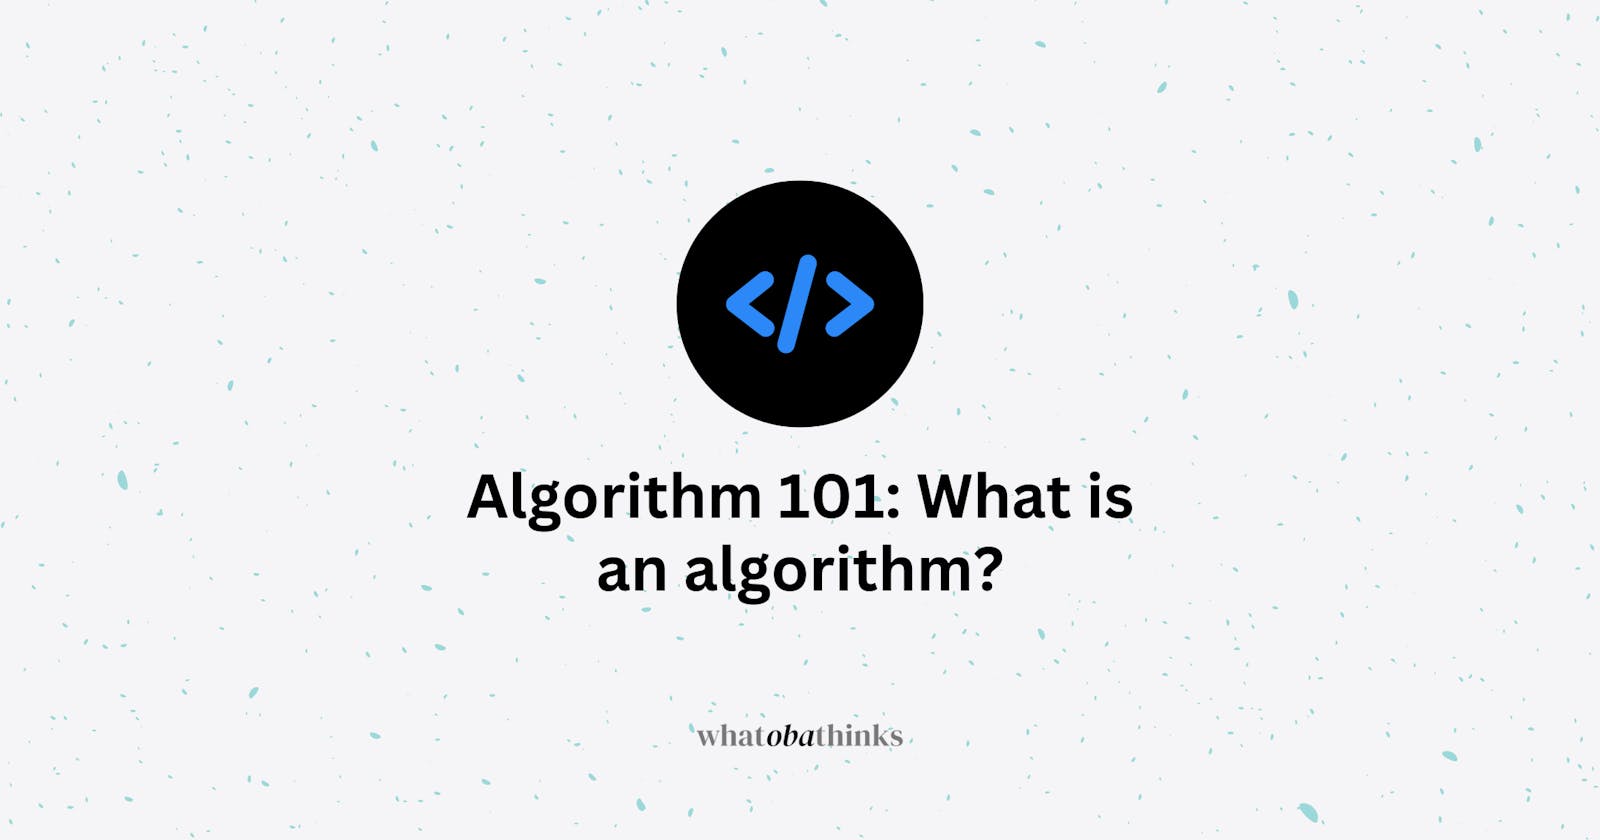 What exactly is an algorithm?